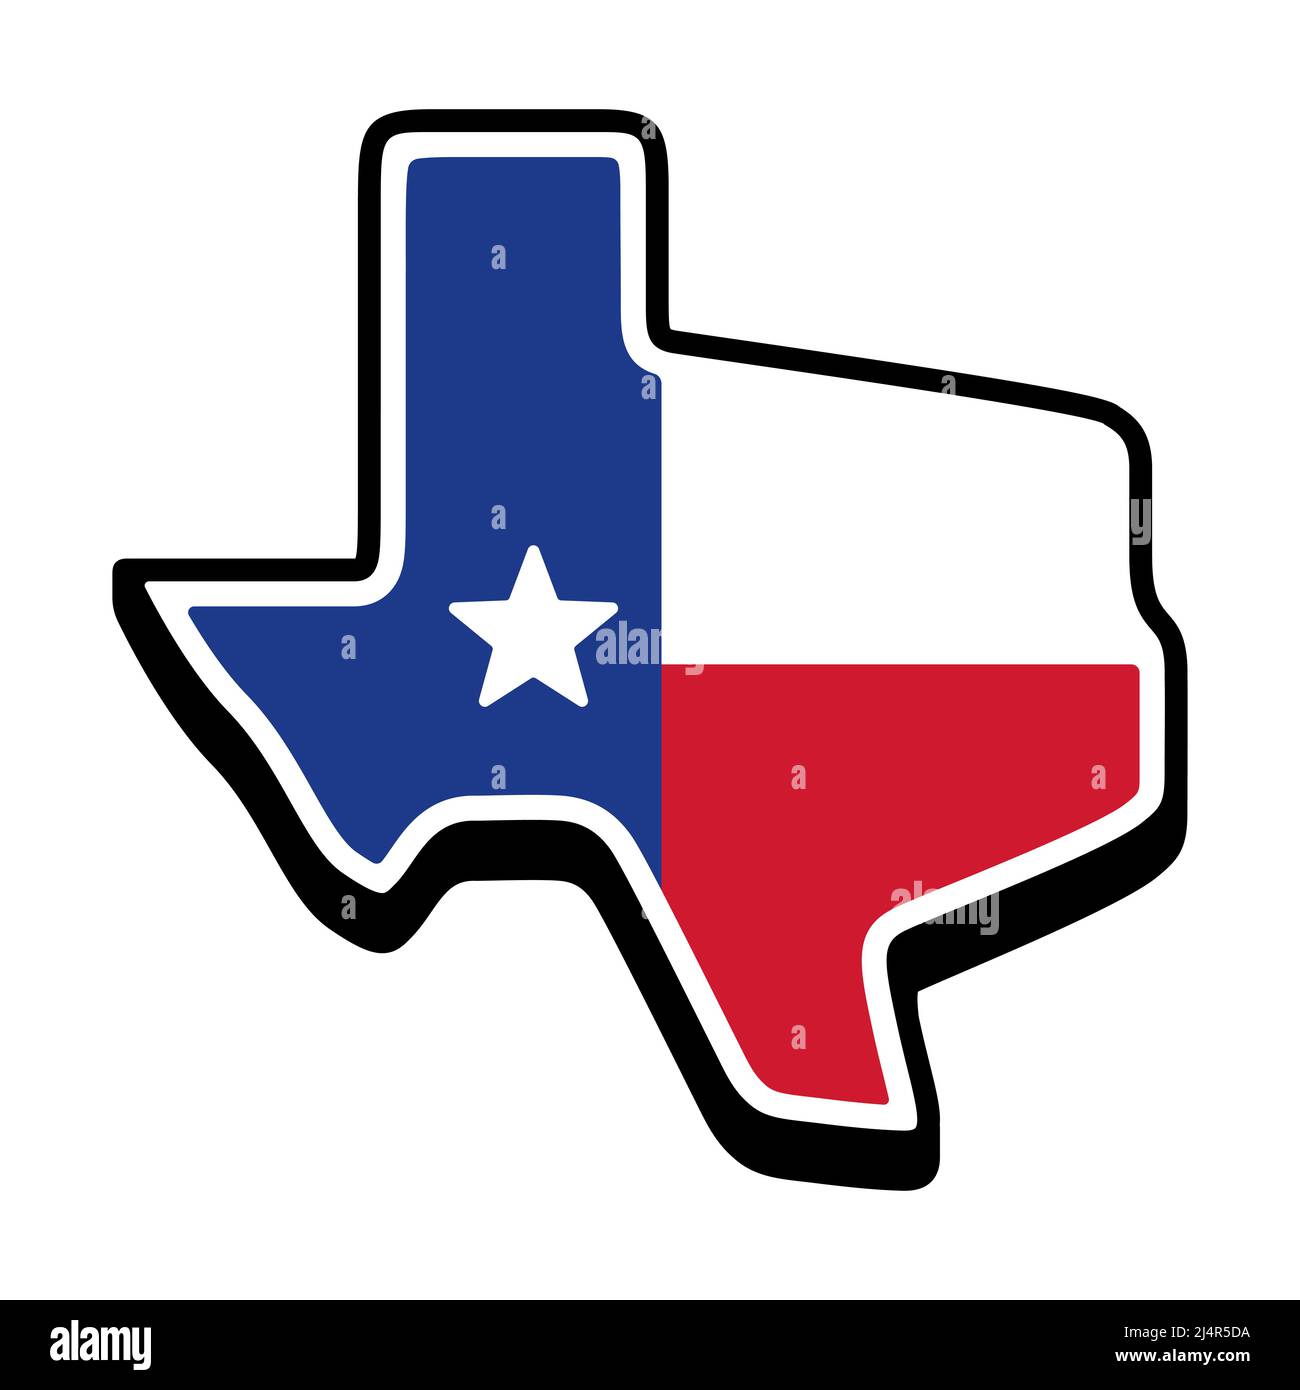 Texas state shape silhouette with Texas flag. Icon or sticker, vector clip art illustration. Stock Vector